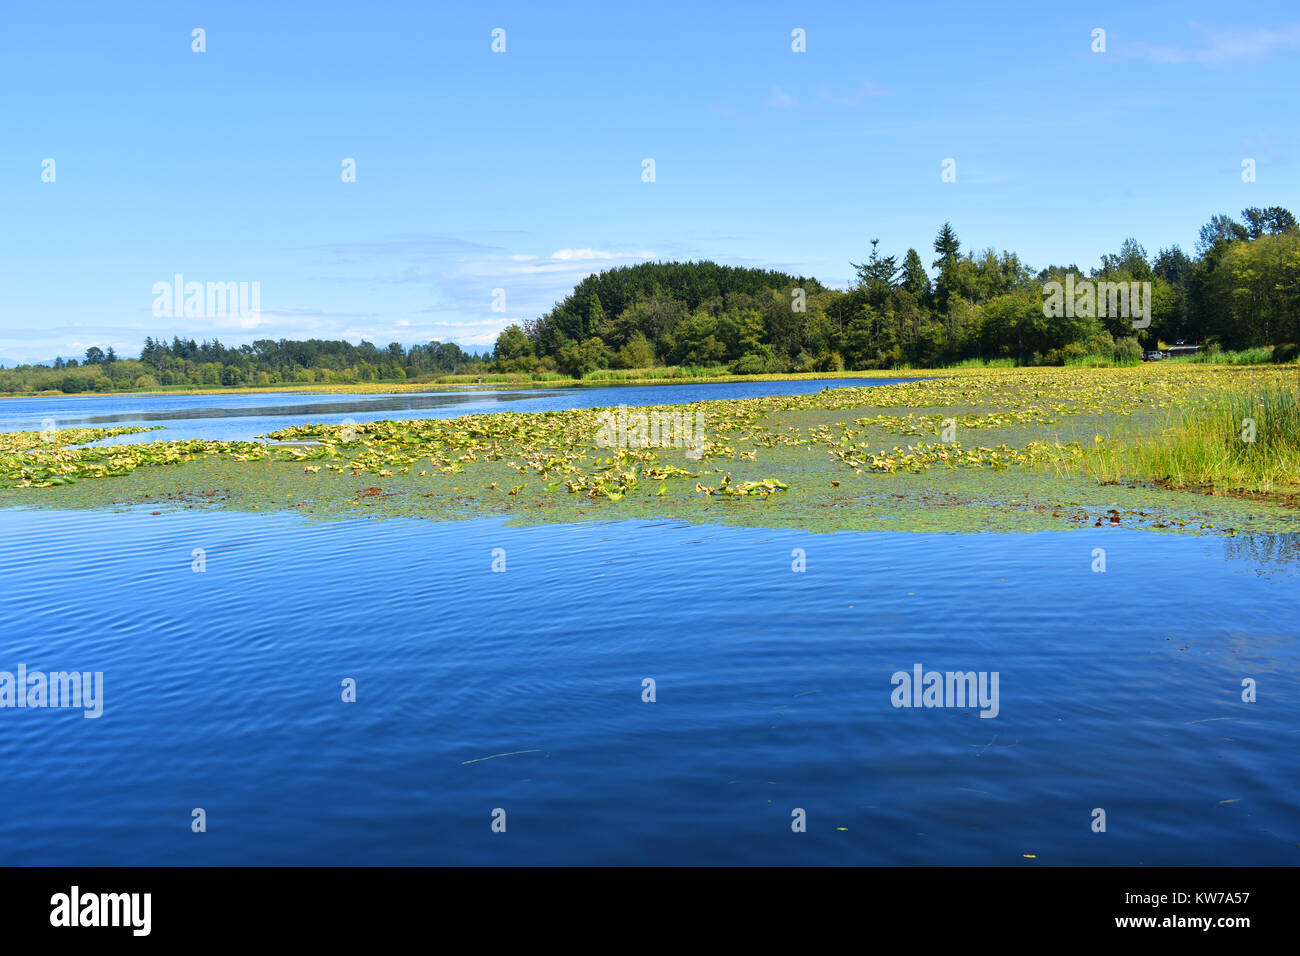 Beautiful Lake Terrell in the Pacific Northwest city of Ferndale, Washington, USA. Home to waterfowl and various fish.  Tournaments are held here. Stock Photo